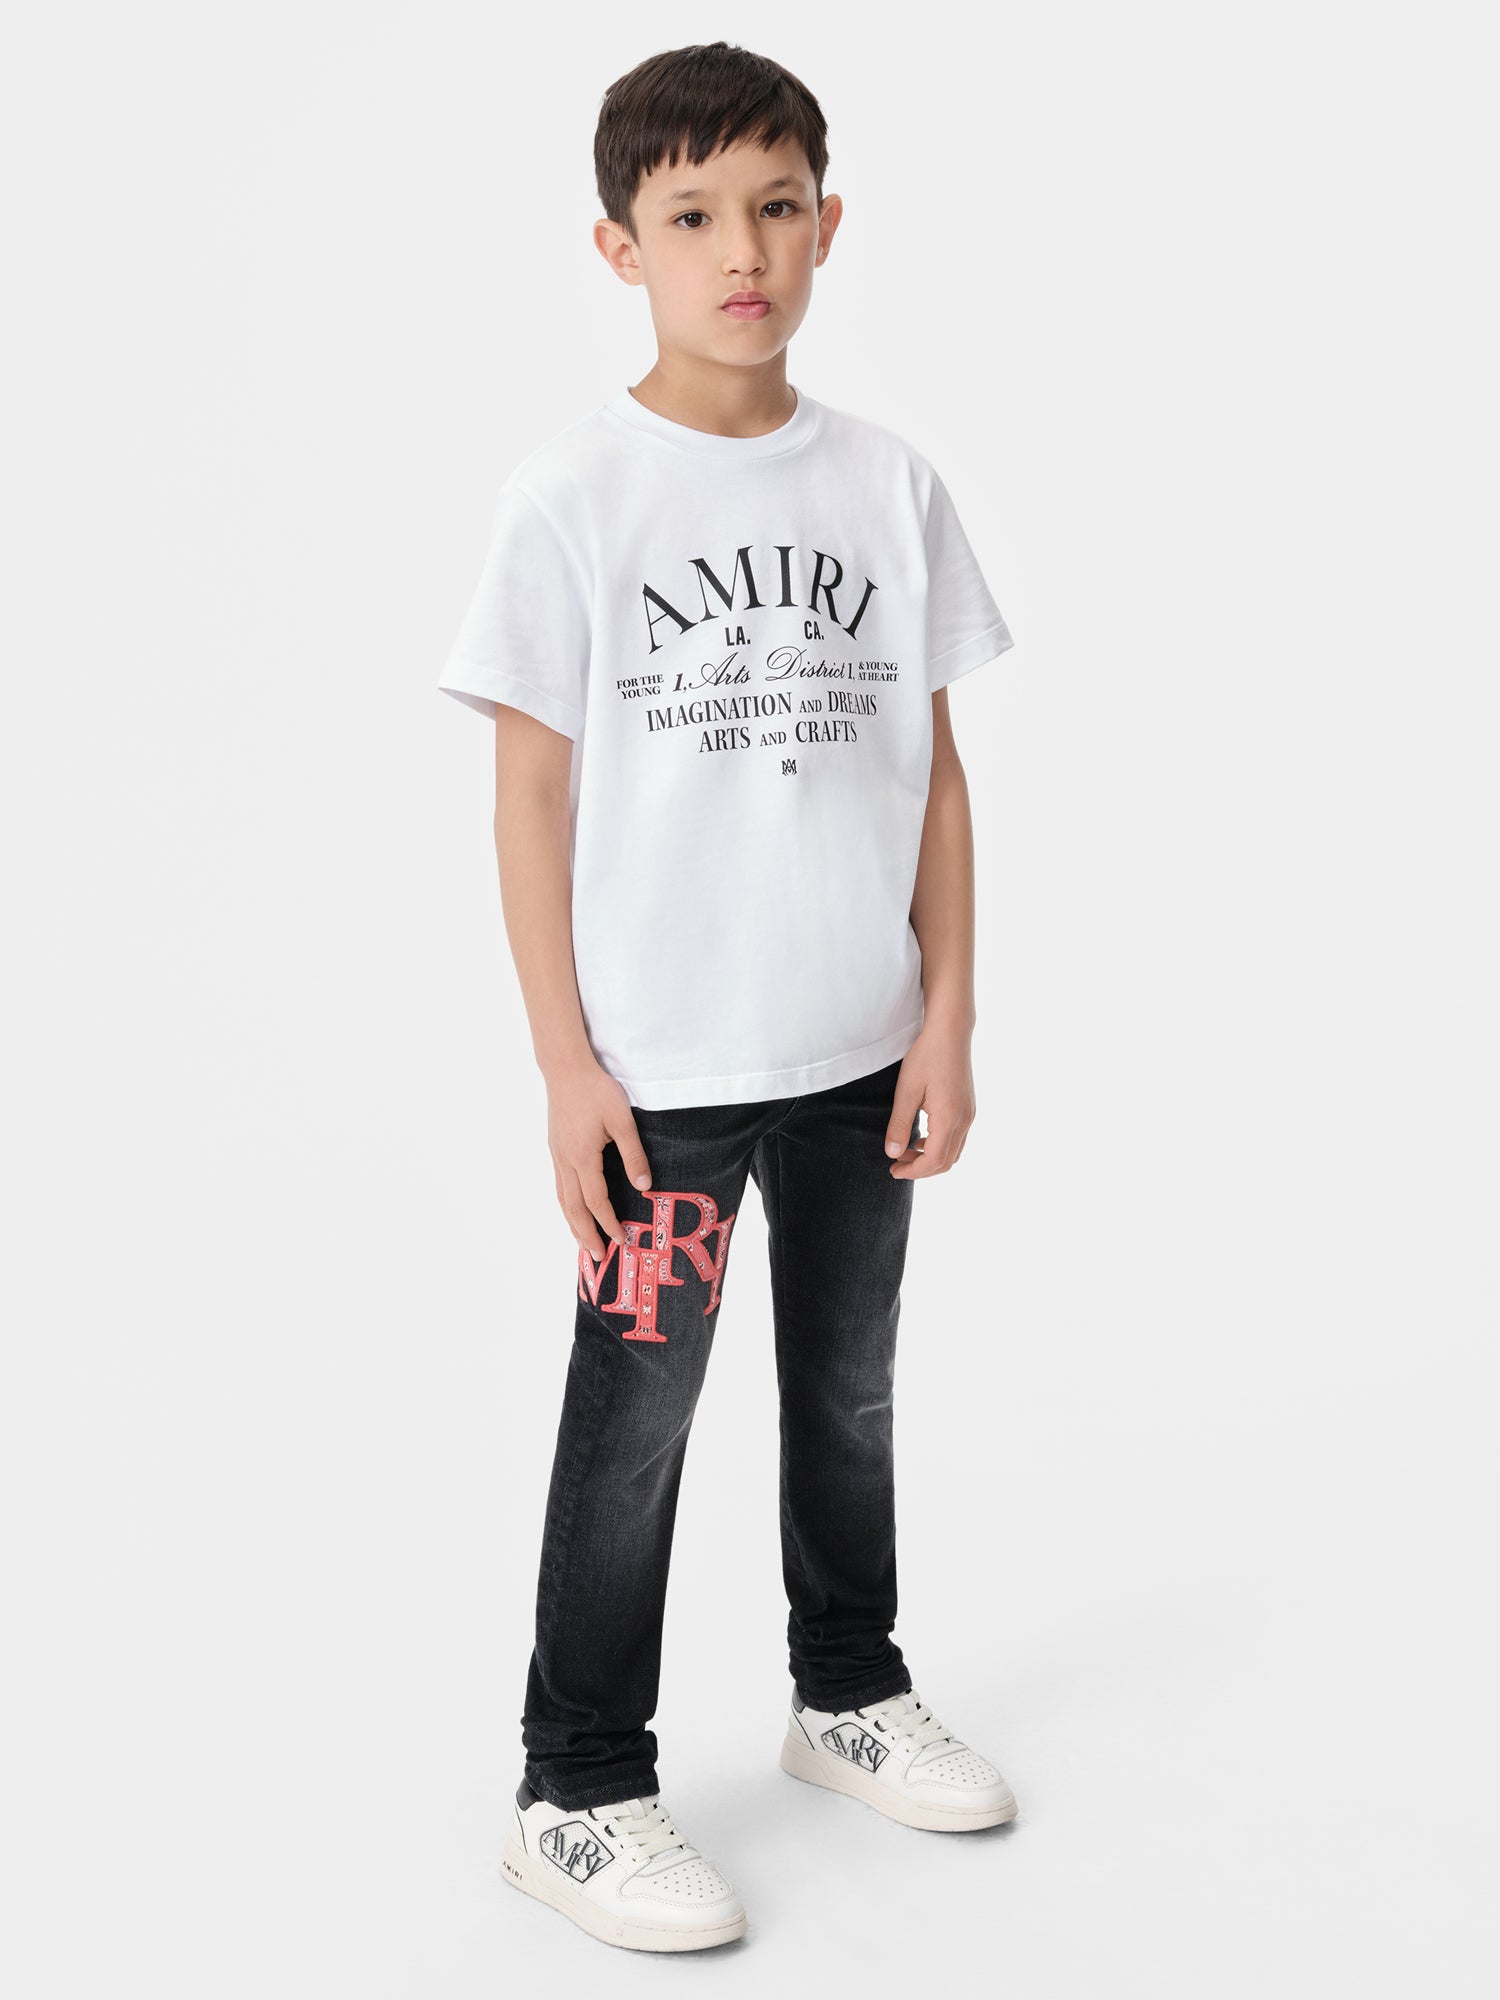 Product KIDS - KIDS' BANDANA STAGGERED LOGO JEAN - Faded Black featured image